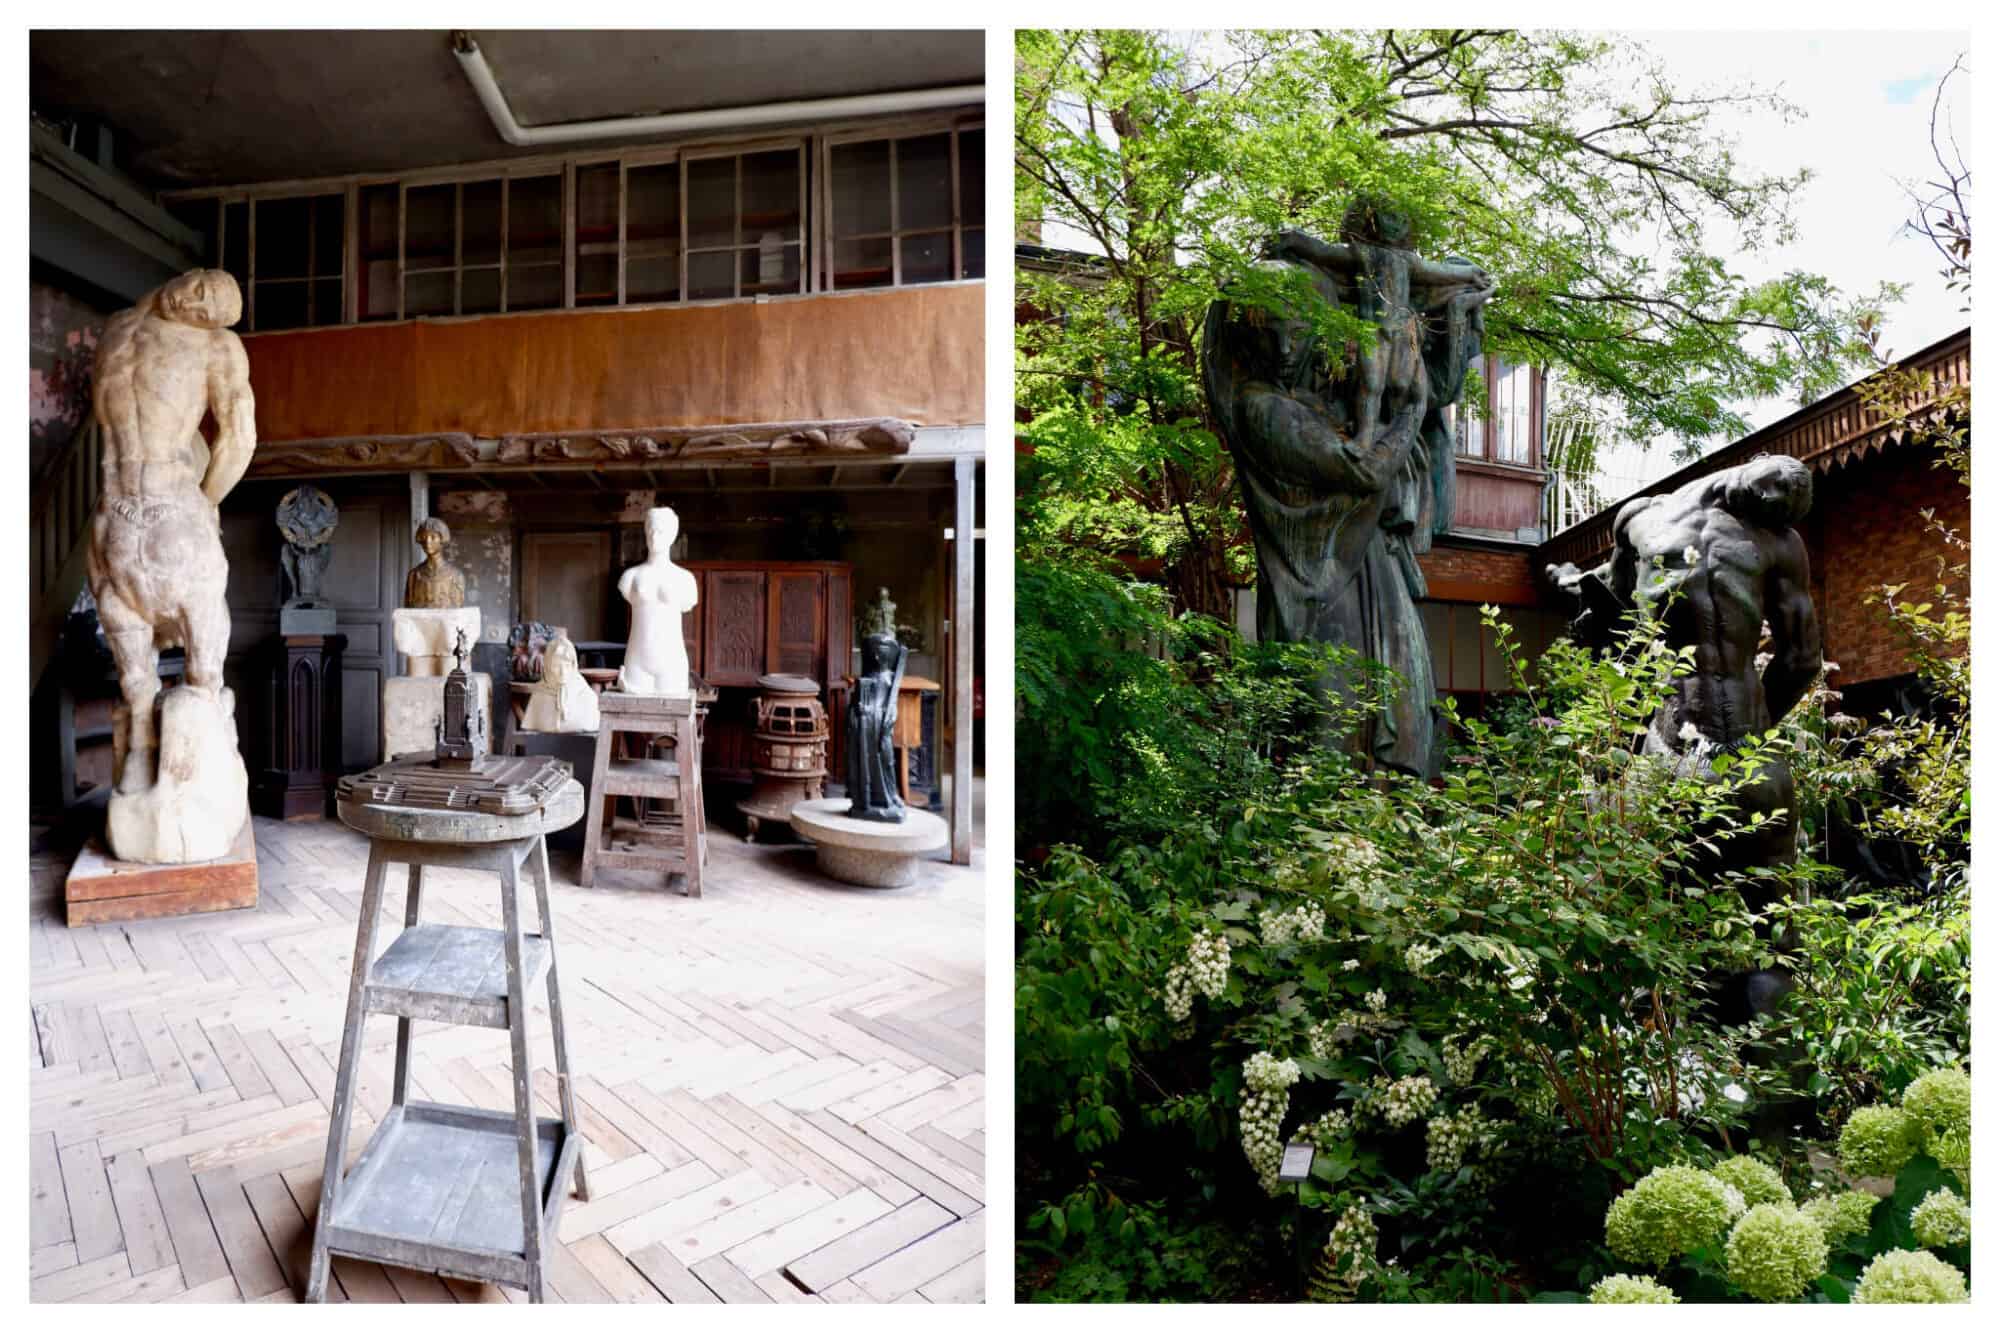 Left, the sculptures inside the Musée Bourdelle, a museum dedicated to the work of French sculptor Antoine Bourdelle. Right, the leafy gardens and sculptures of the Musée Bourdelle.